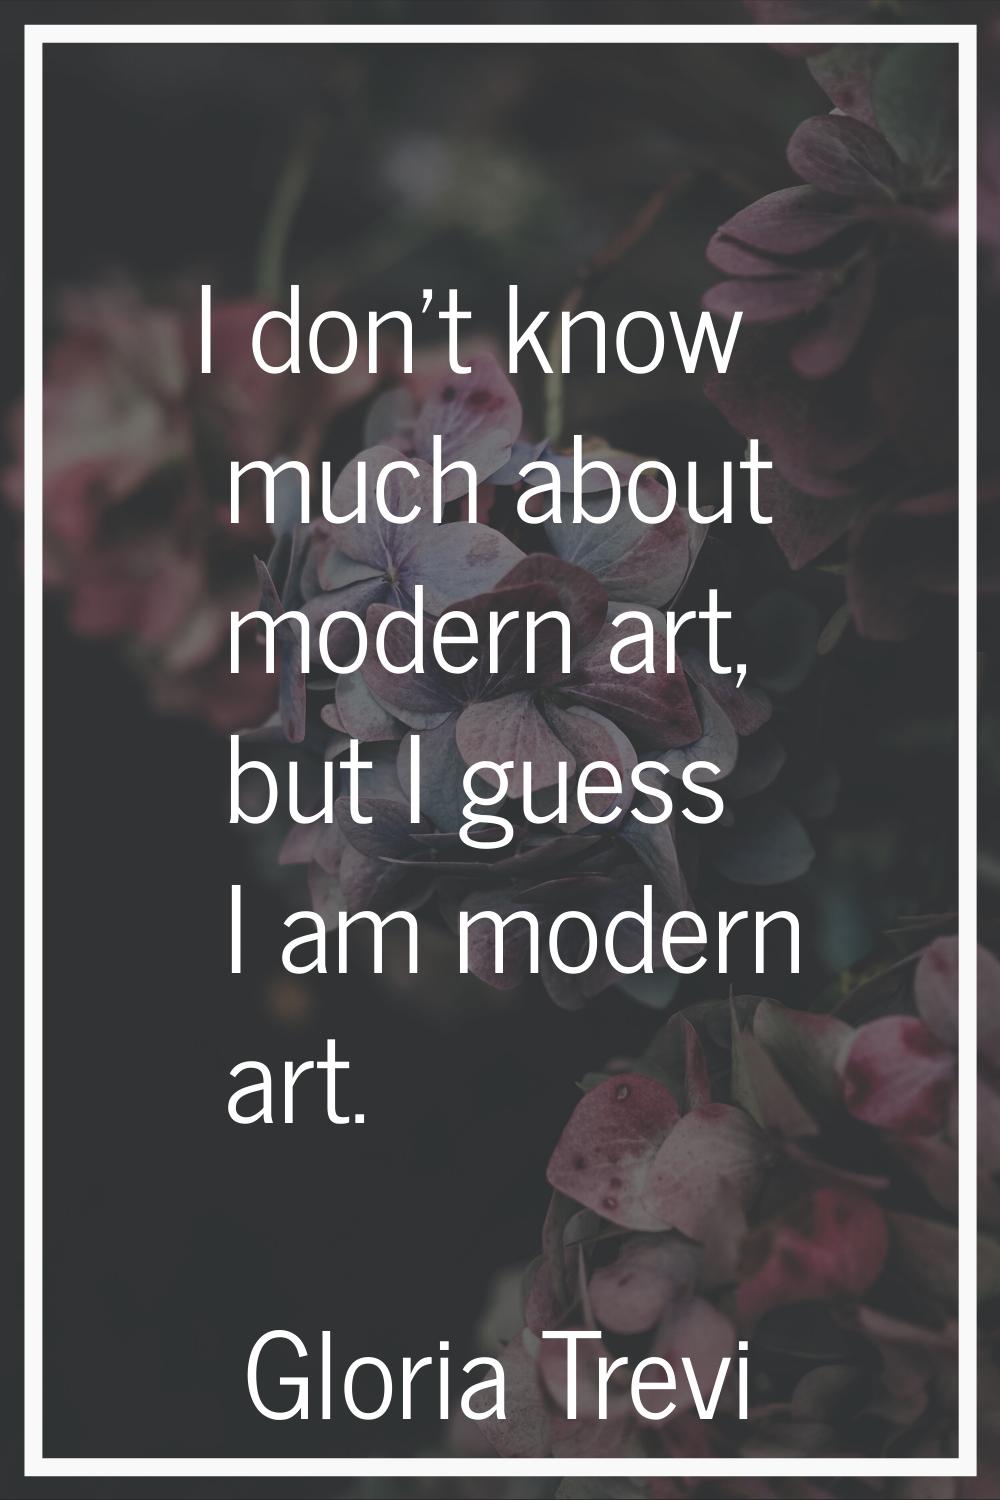 I don't know much about modern art, but I guess I am modern art.